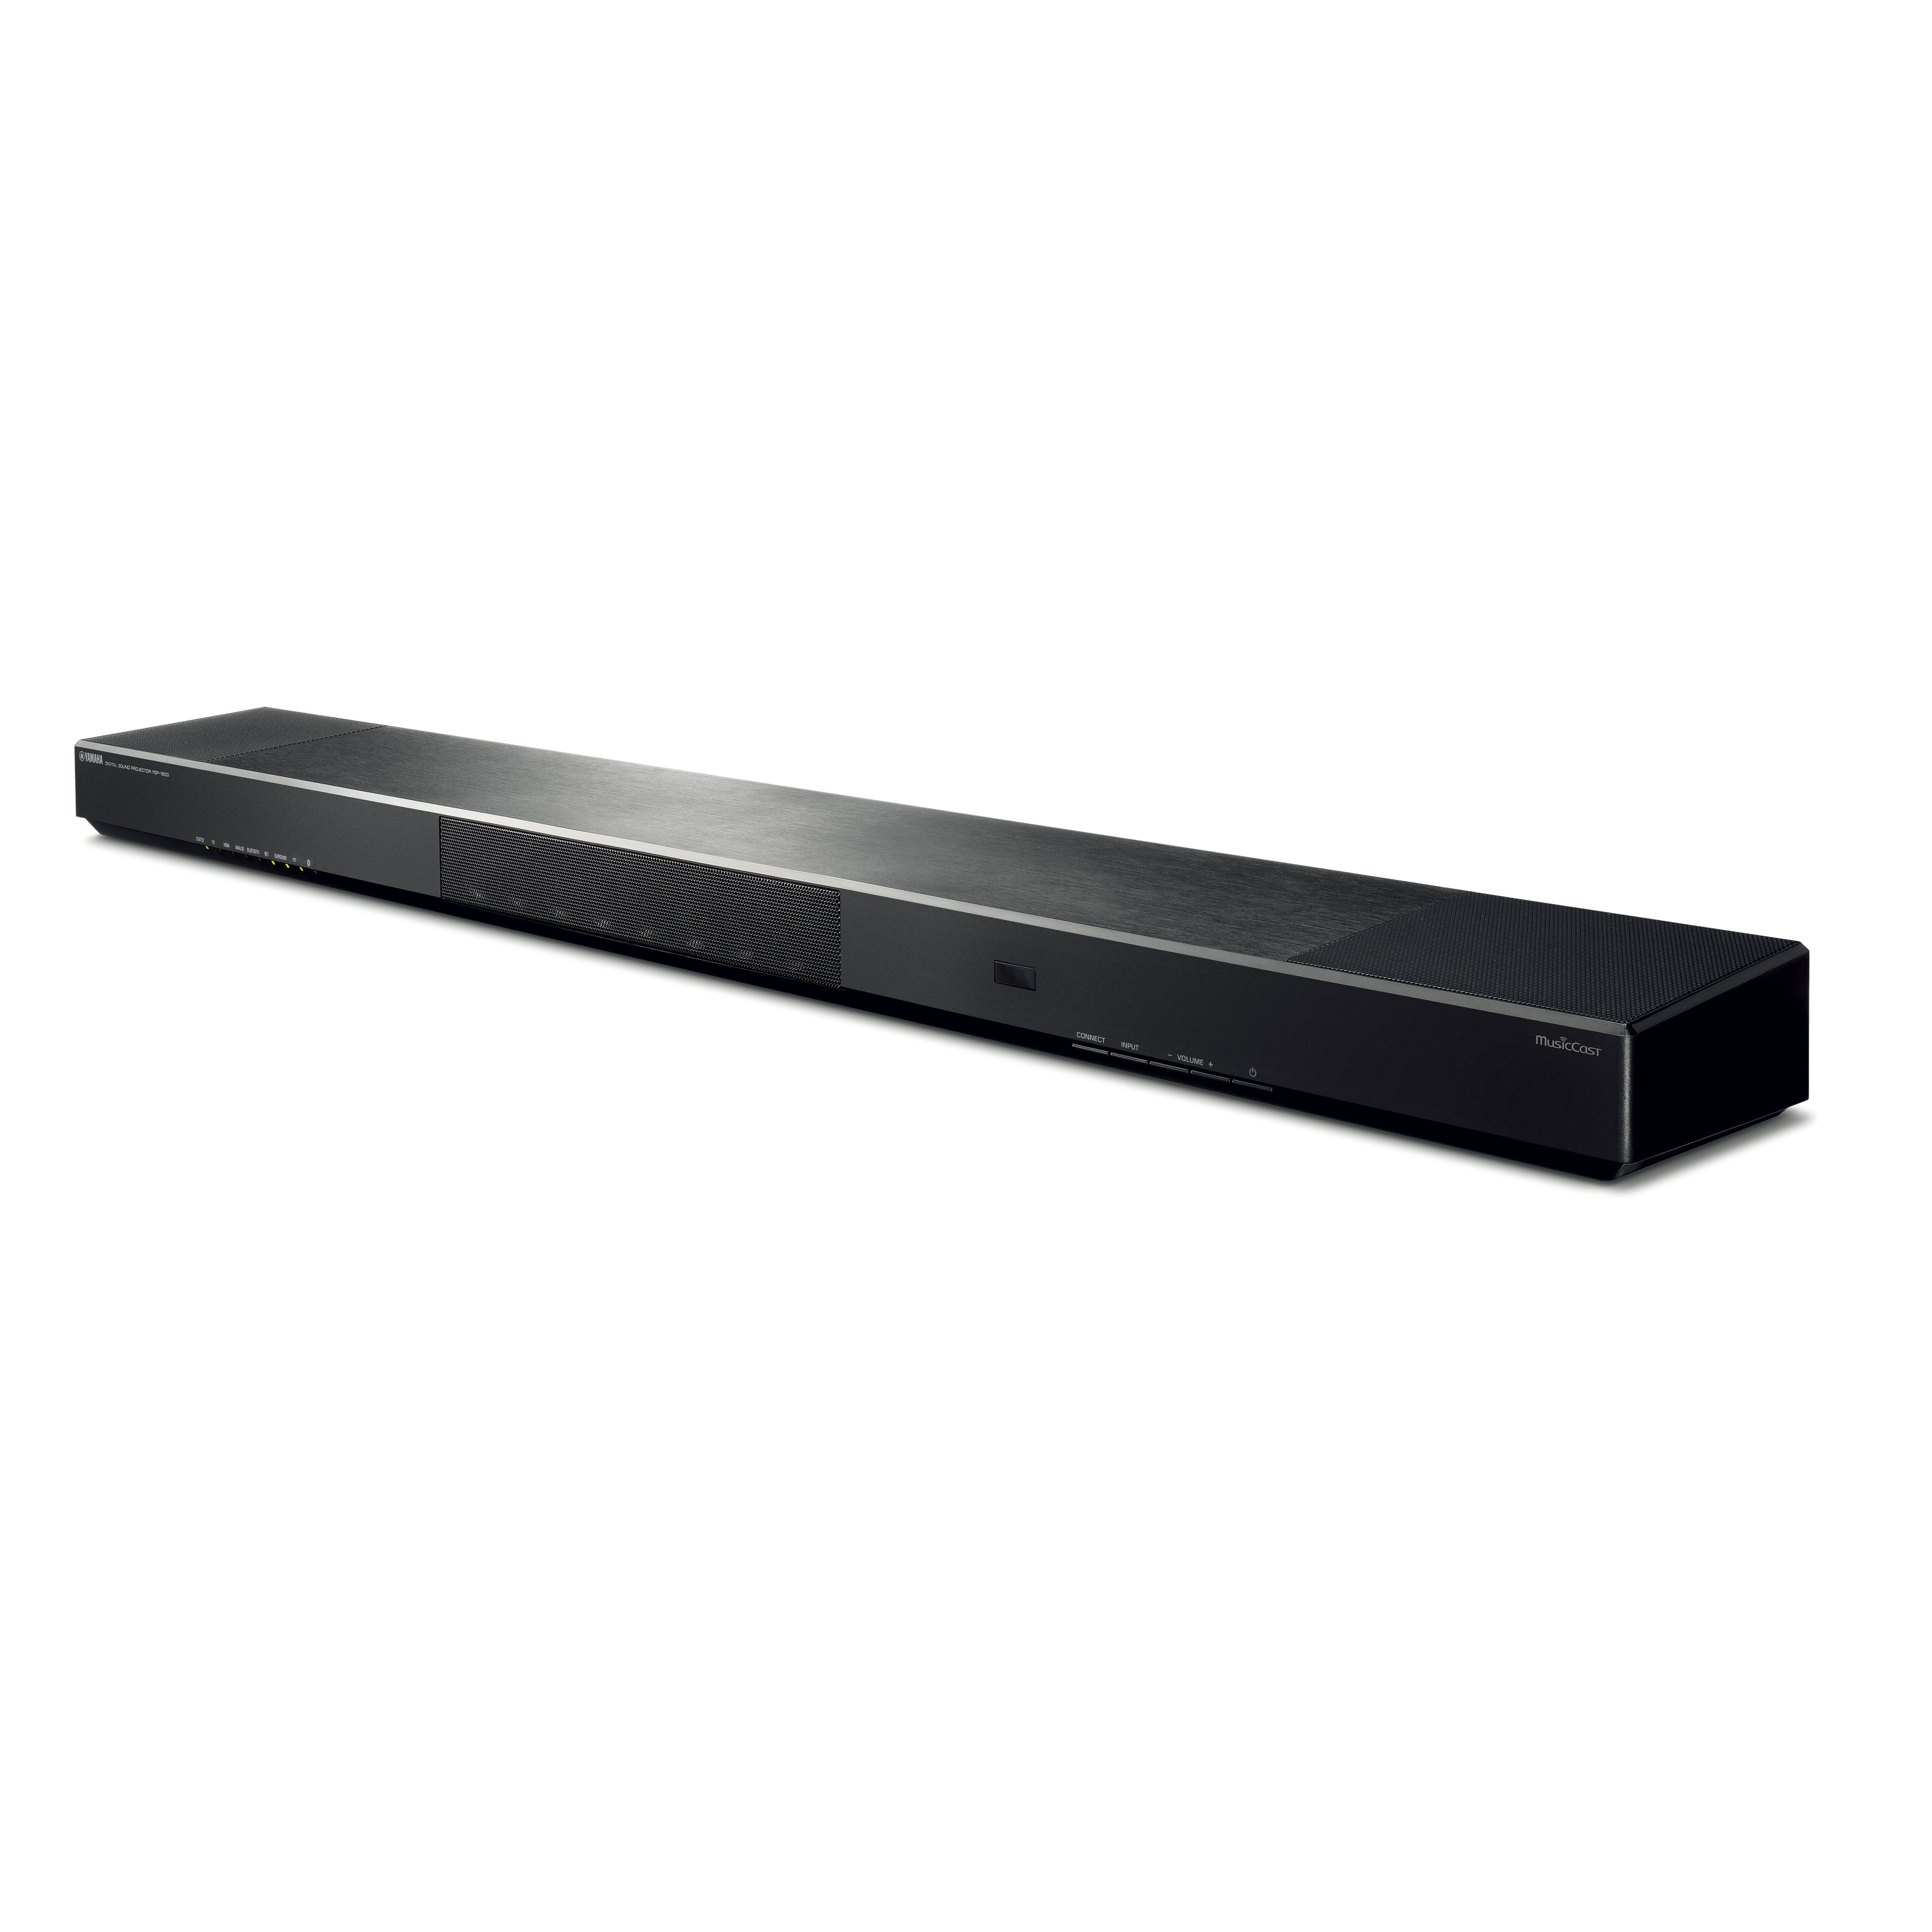 MusicCast YSP-1600 - - Sound Bar - Audio & Visual - Products - - Other European